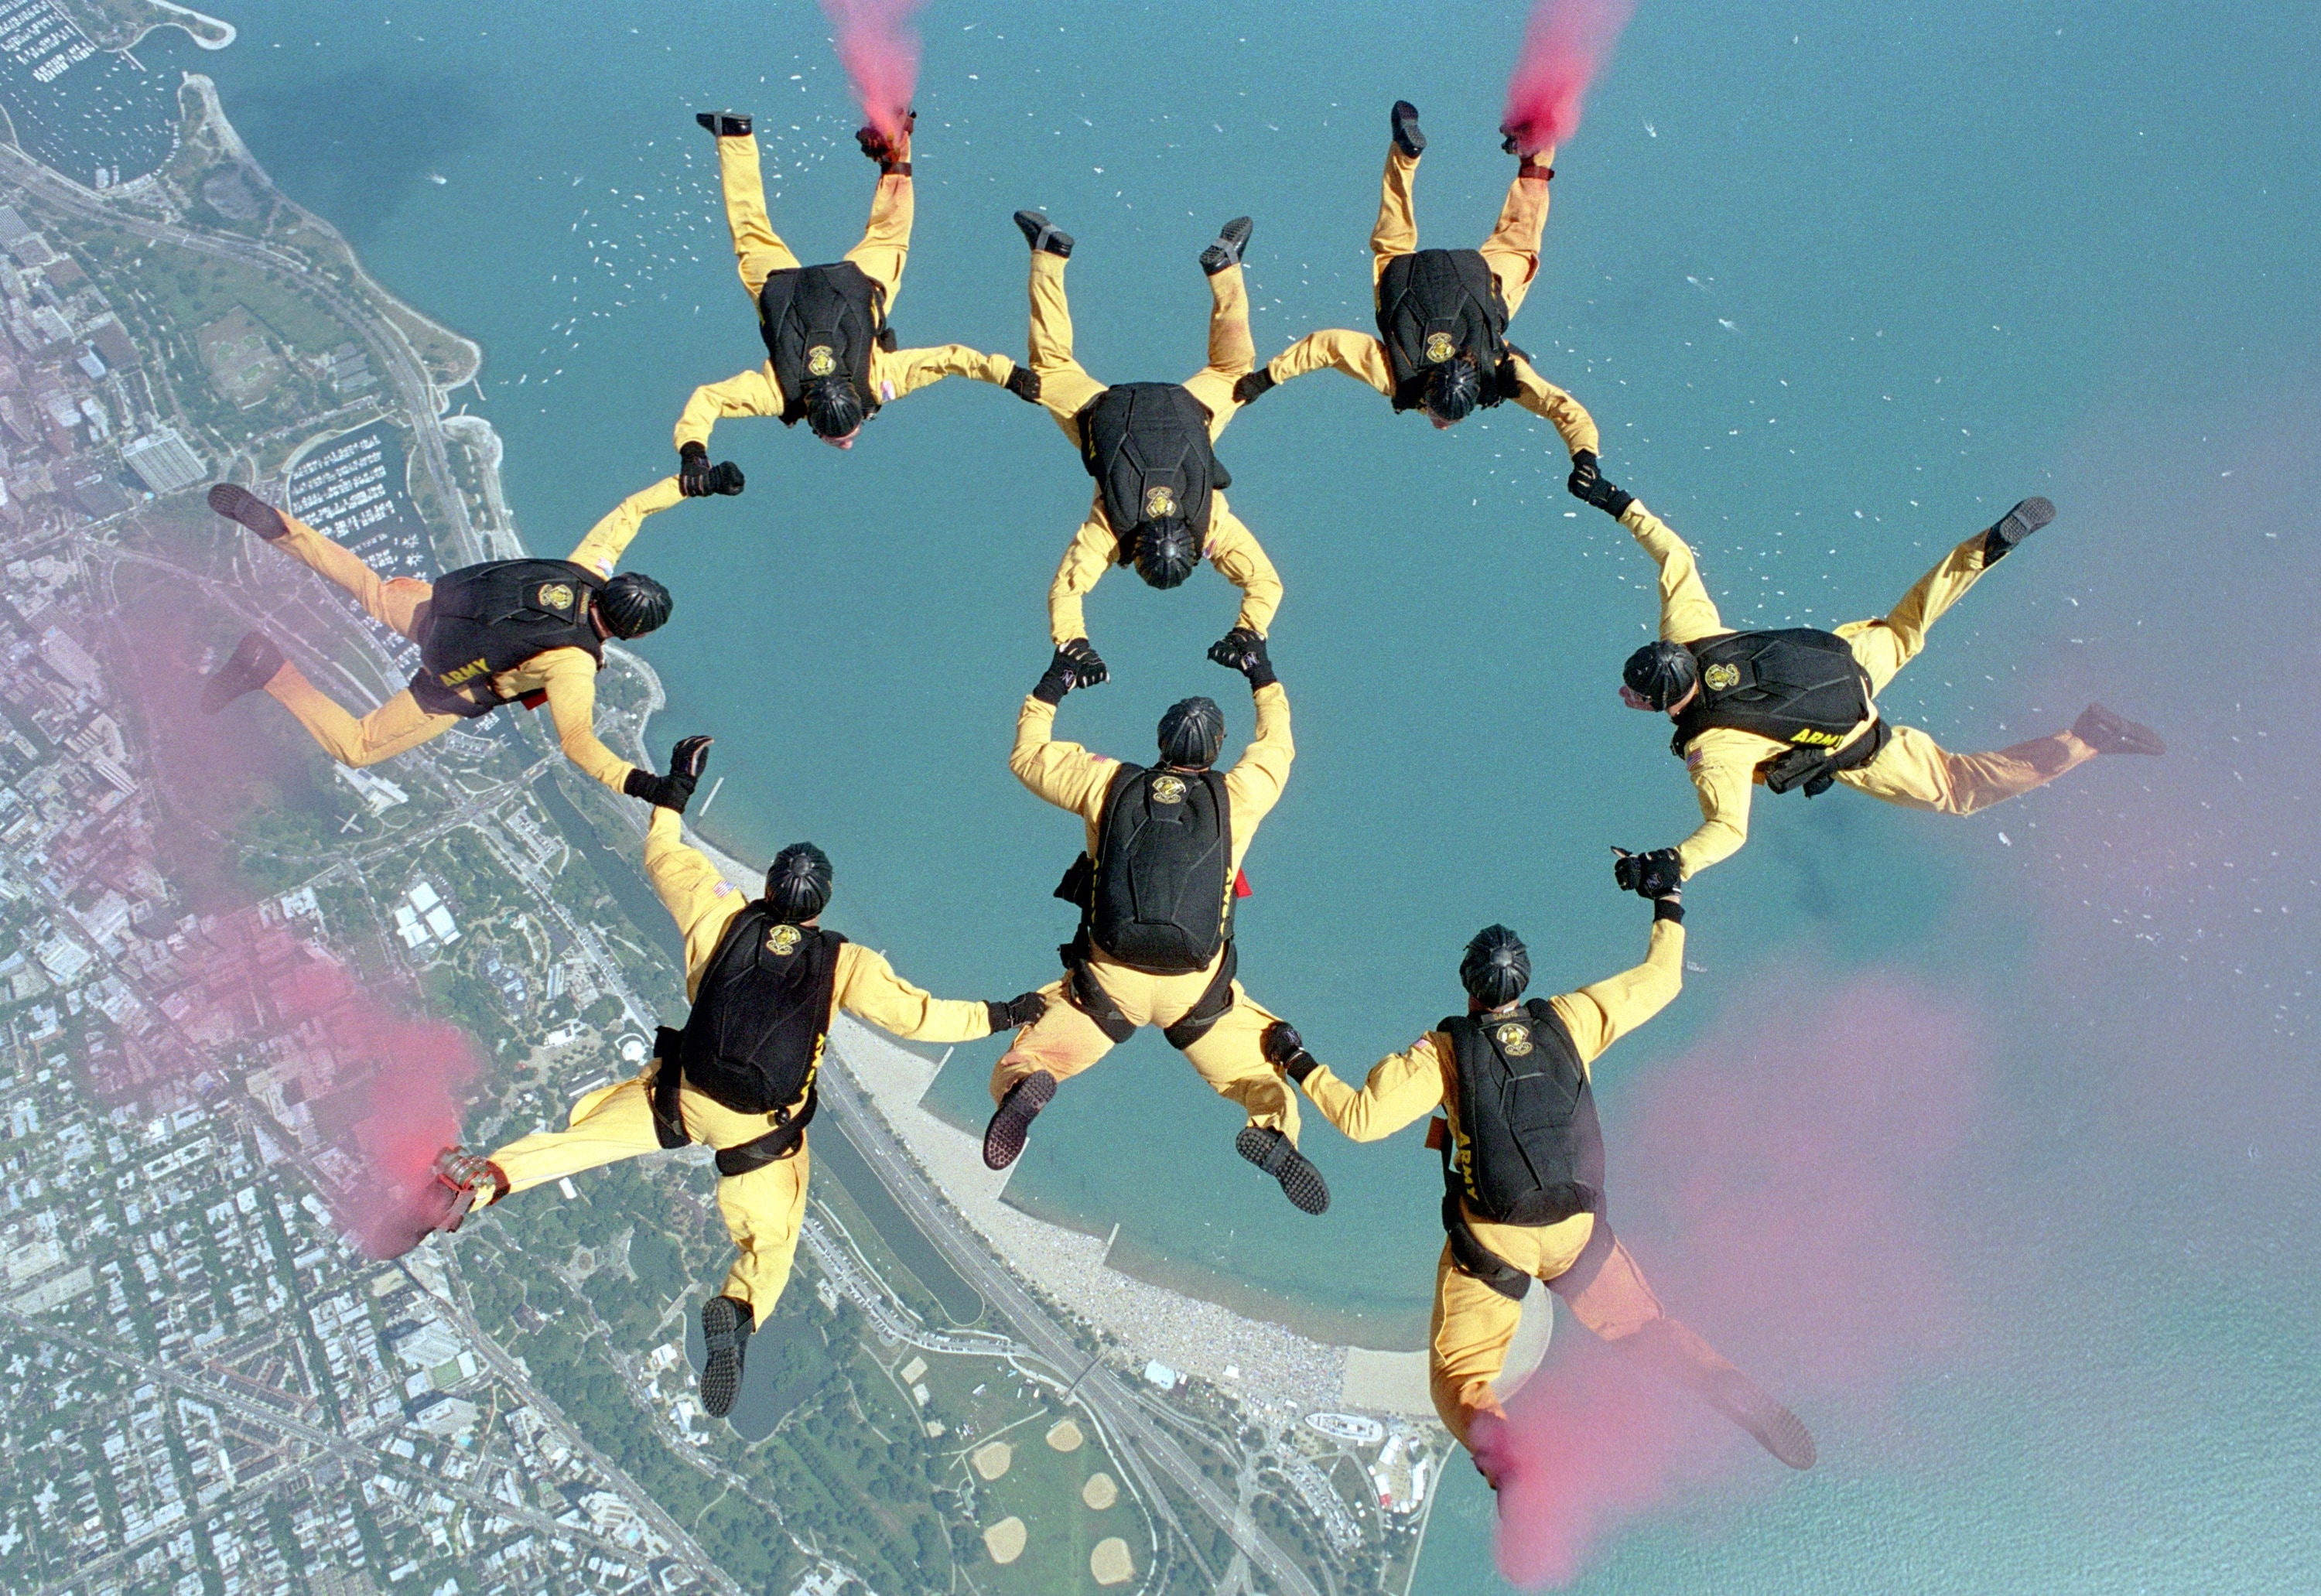 group of people doing sky diving wearing yellow uniform